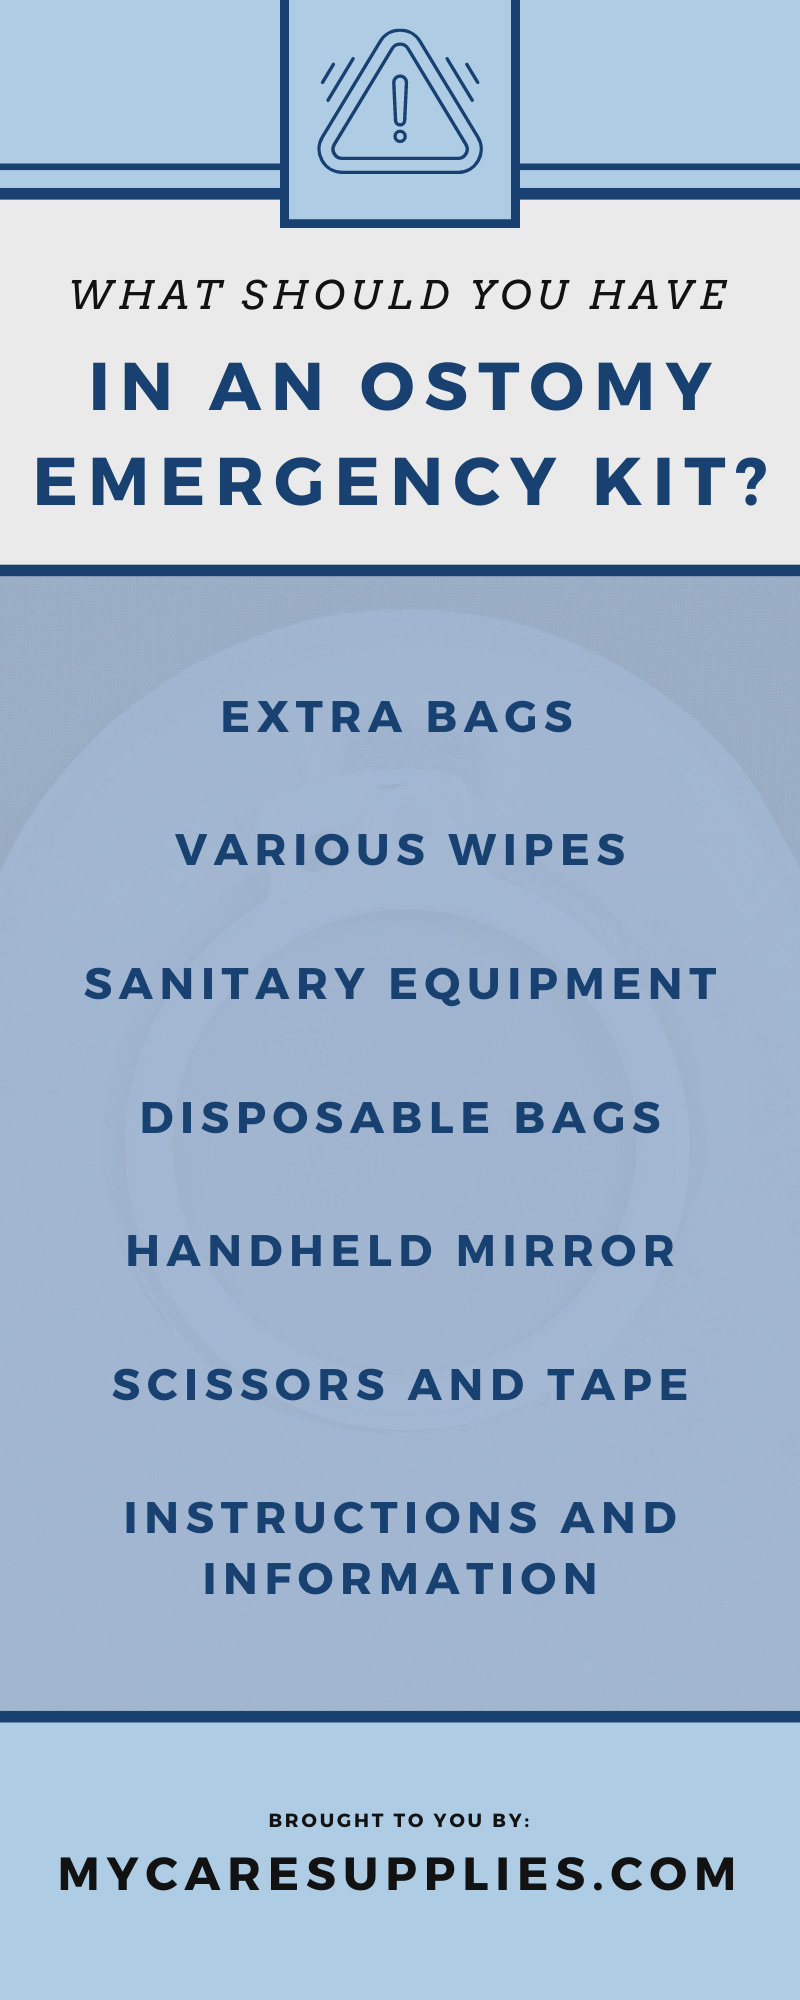 What Should You Have in an Ostomy Emergency Kit?